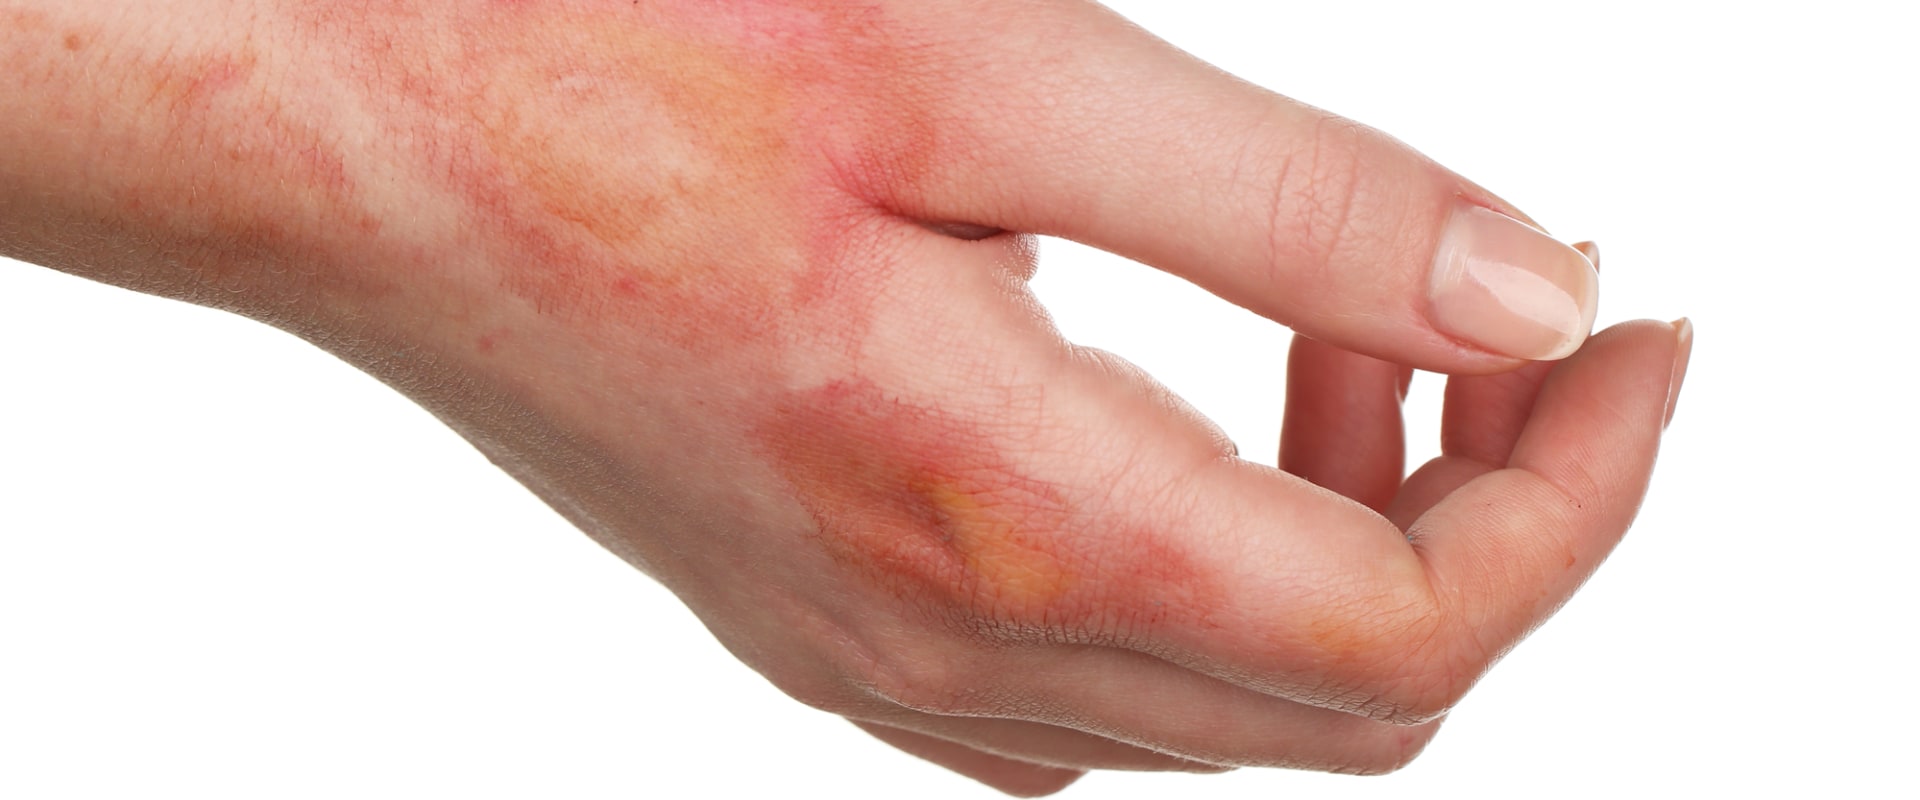 Understanding the Severity of 5th Degree Burns